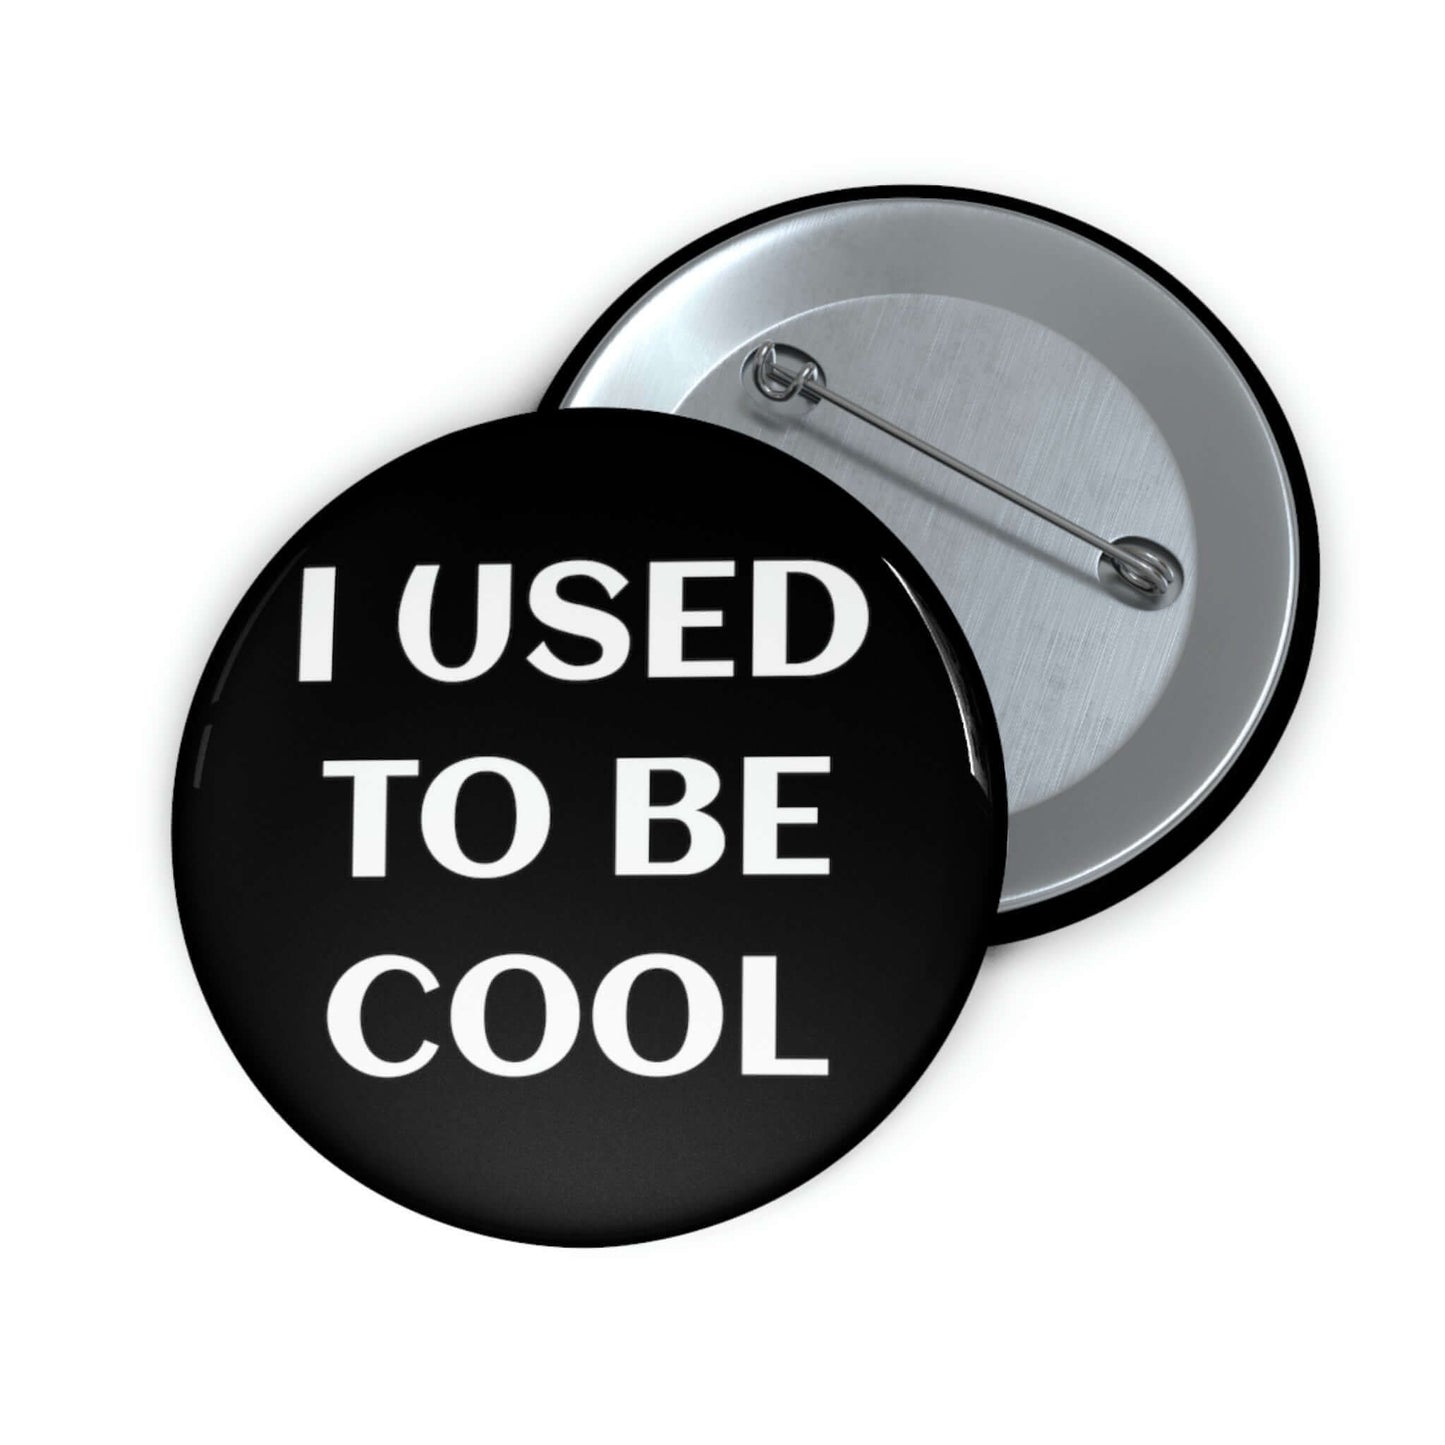 I used to be cool pinback button